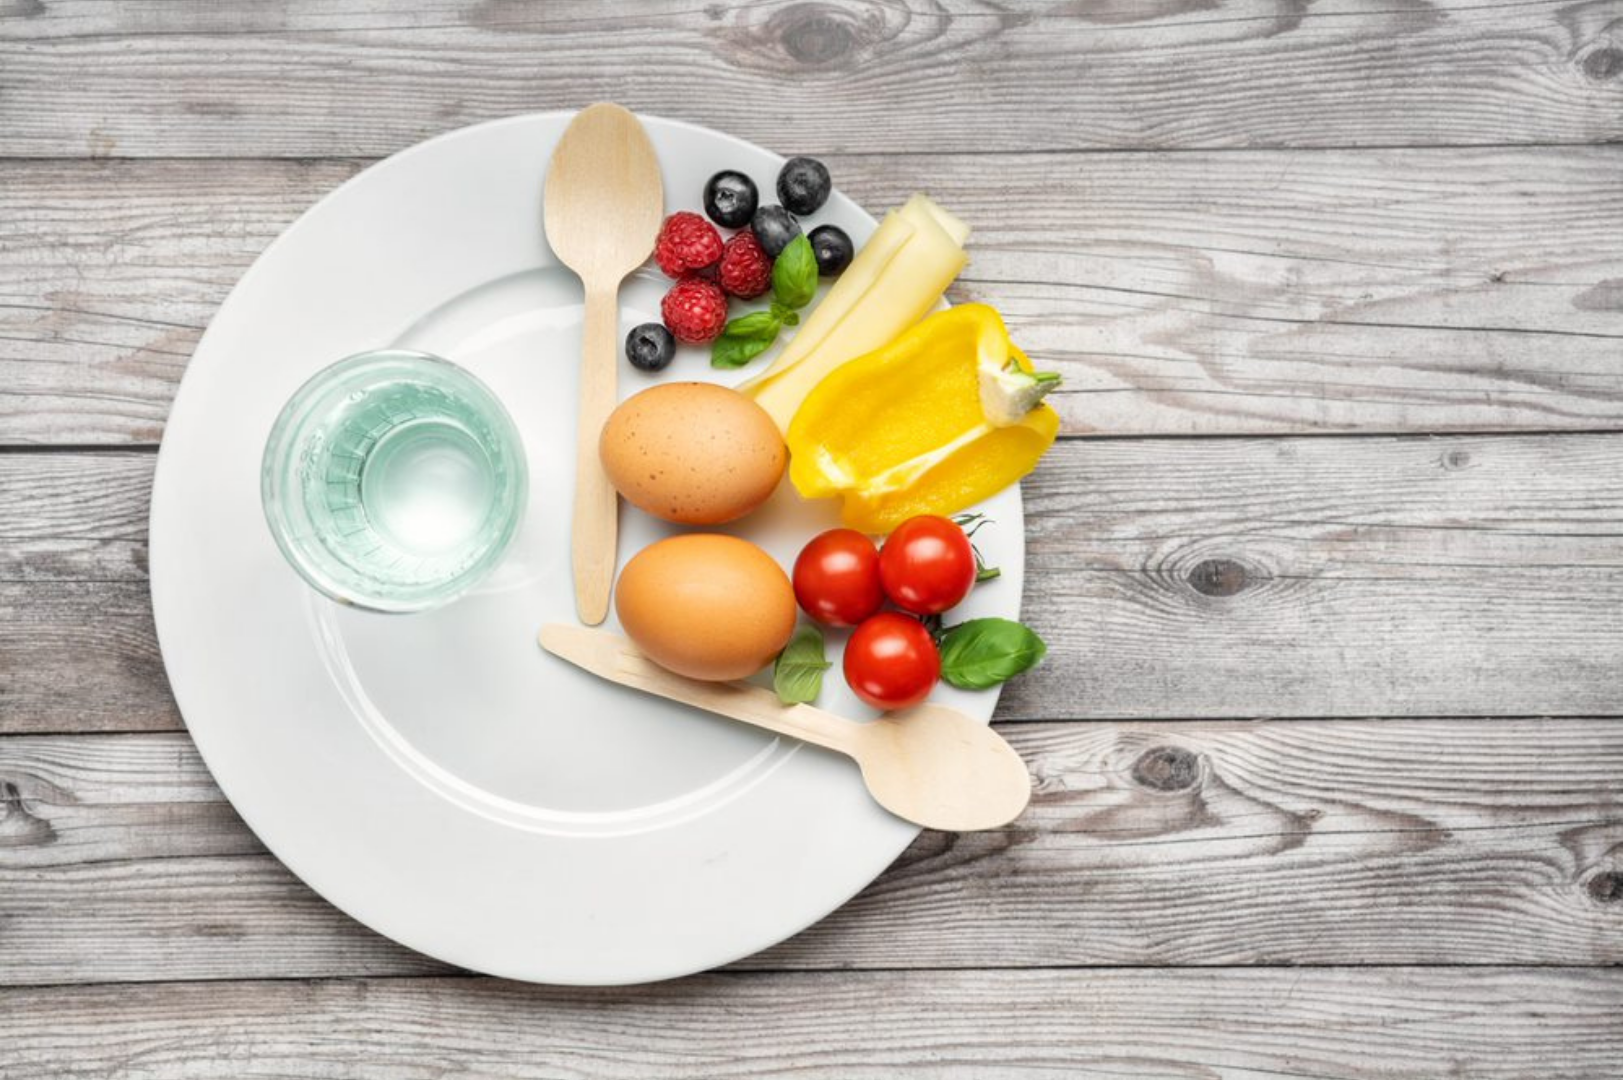 Plate of Healthy Food Image